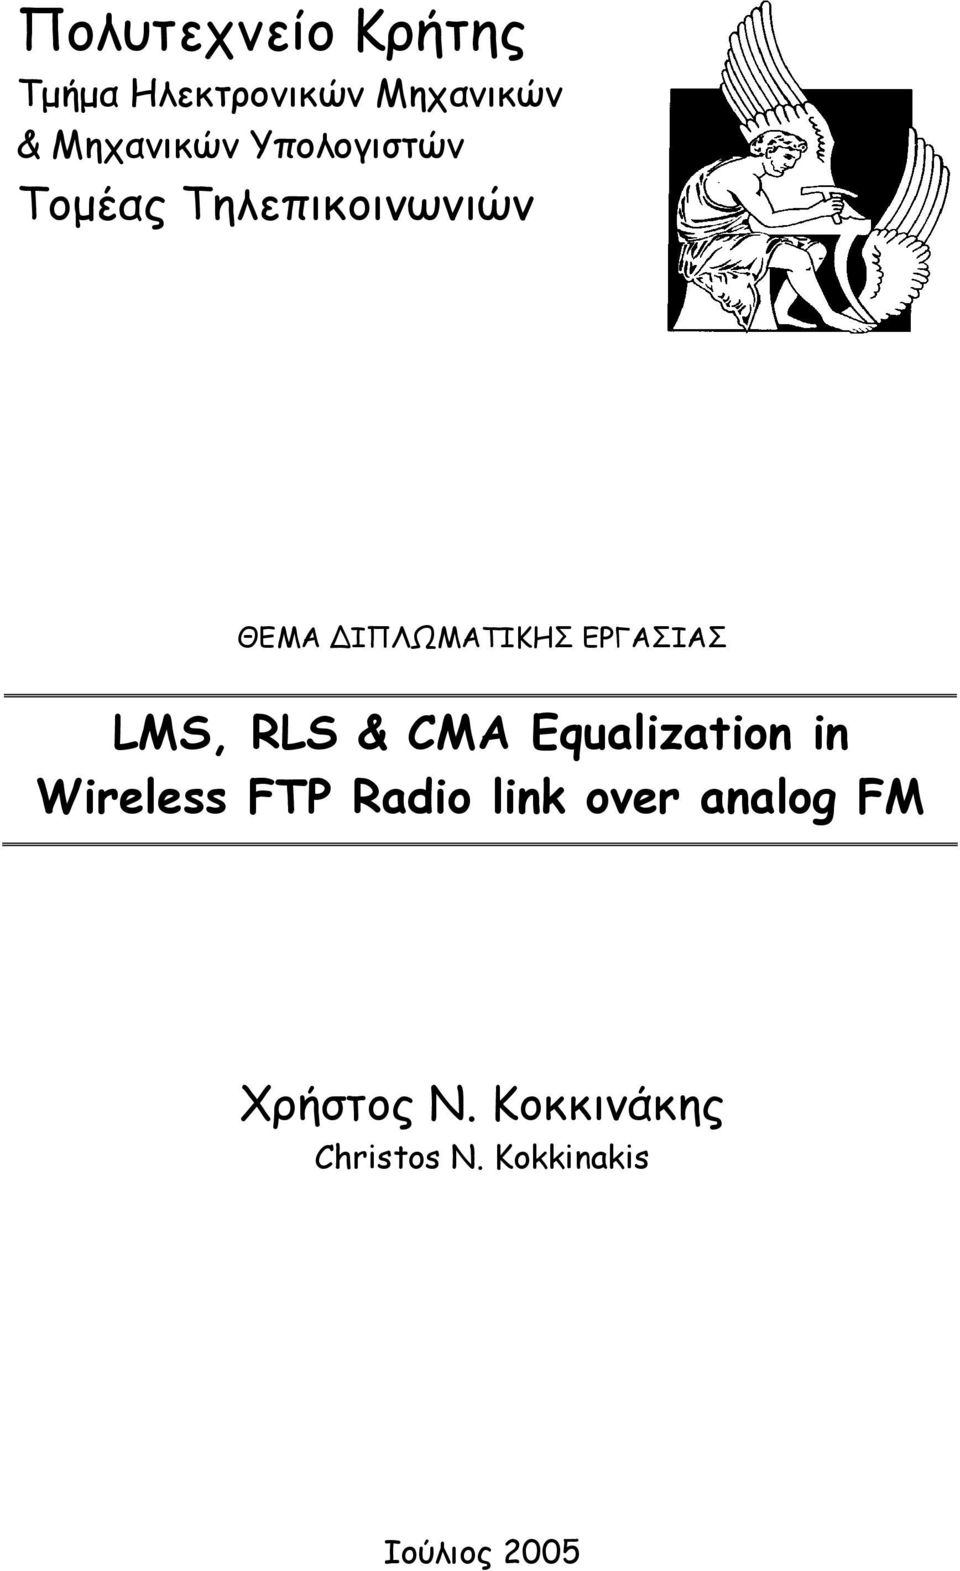 LMS, RLS & CMA Equalization in Wireless FTP Radio link over